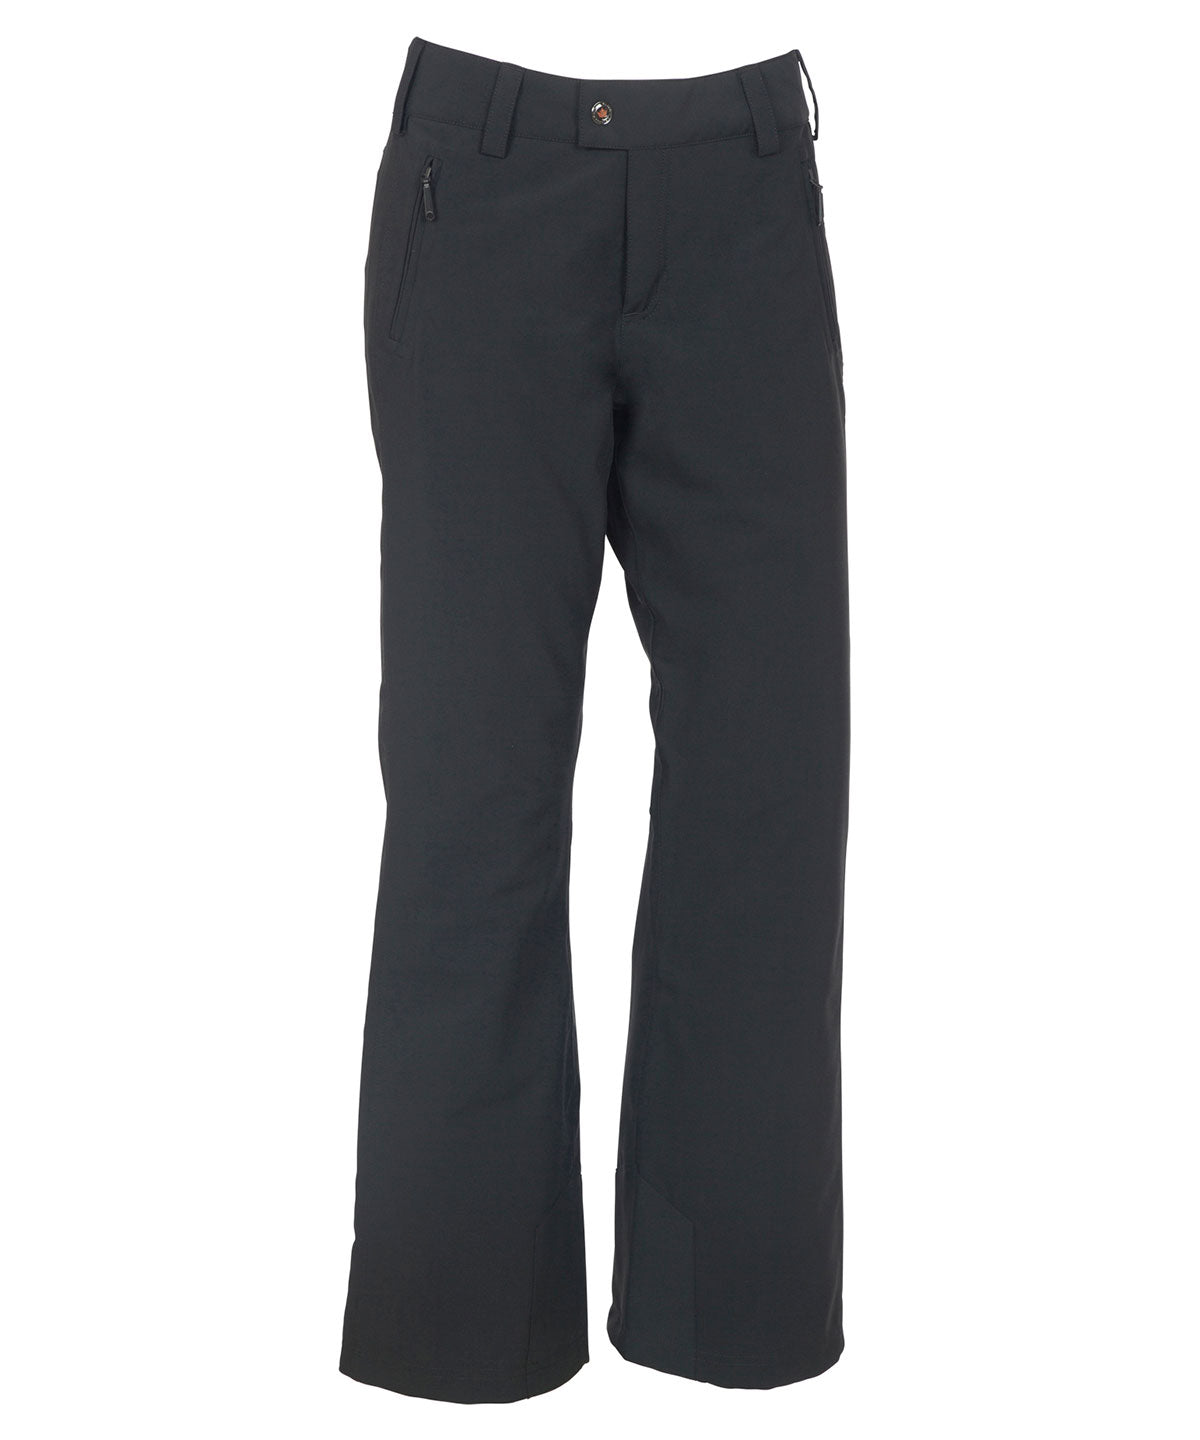 Women's Melina Insulated Stretch Pant